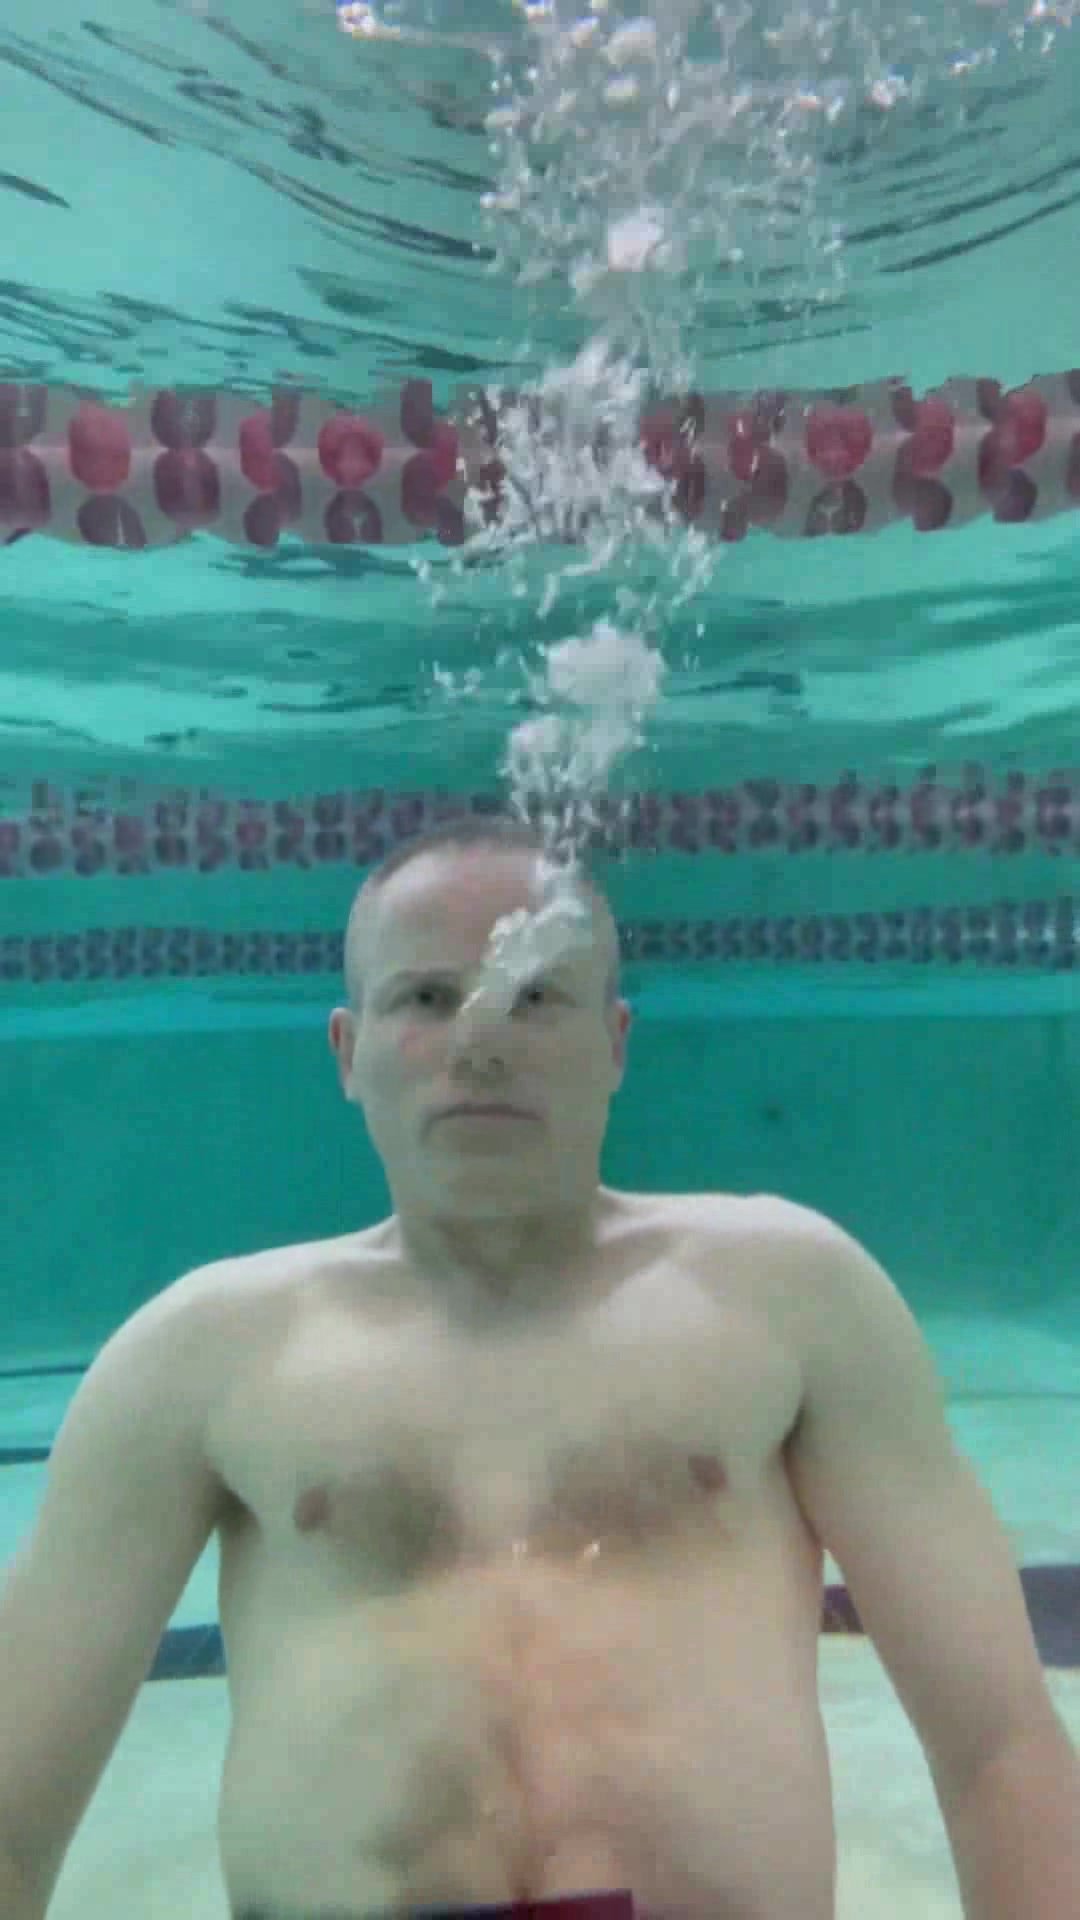 Barefaced guy blowing nose bubbles underwater